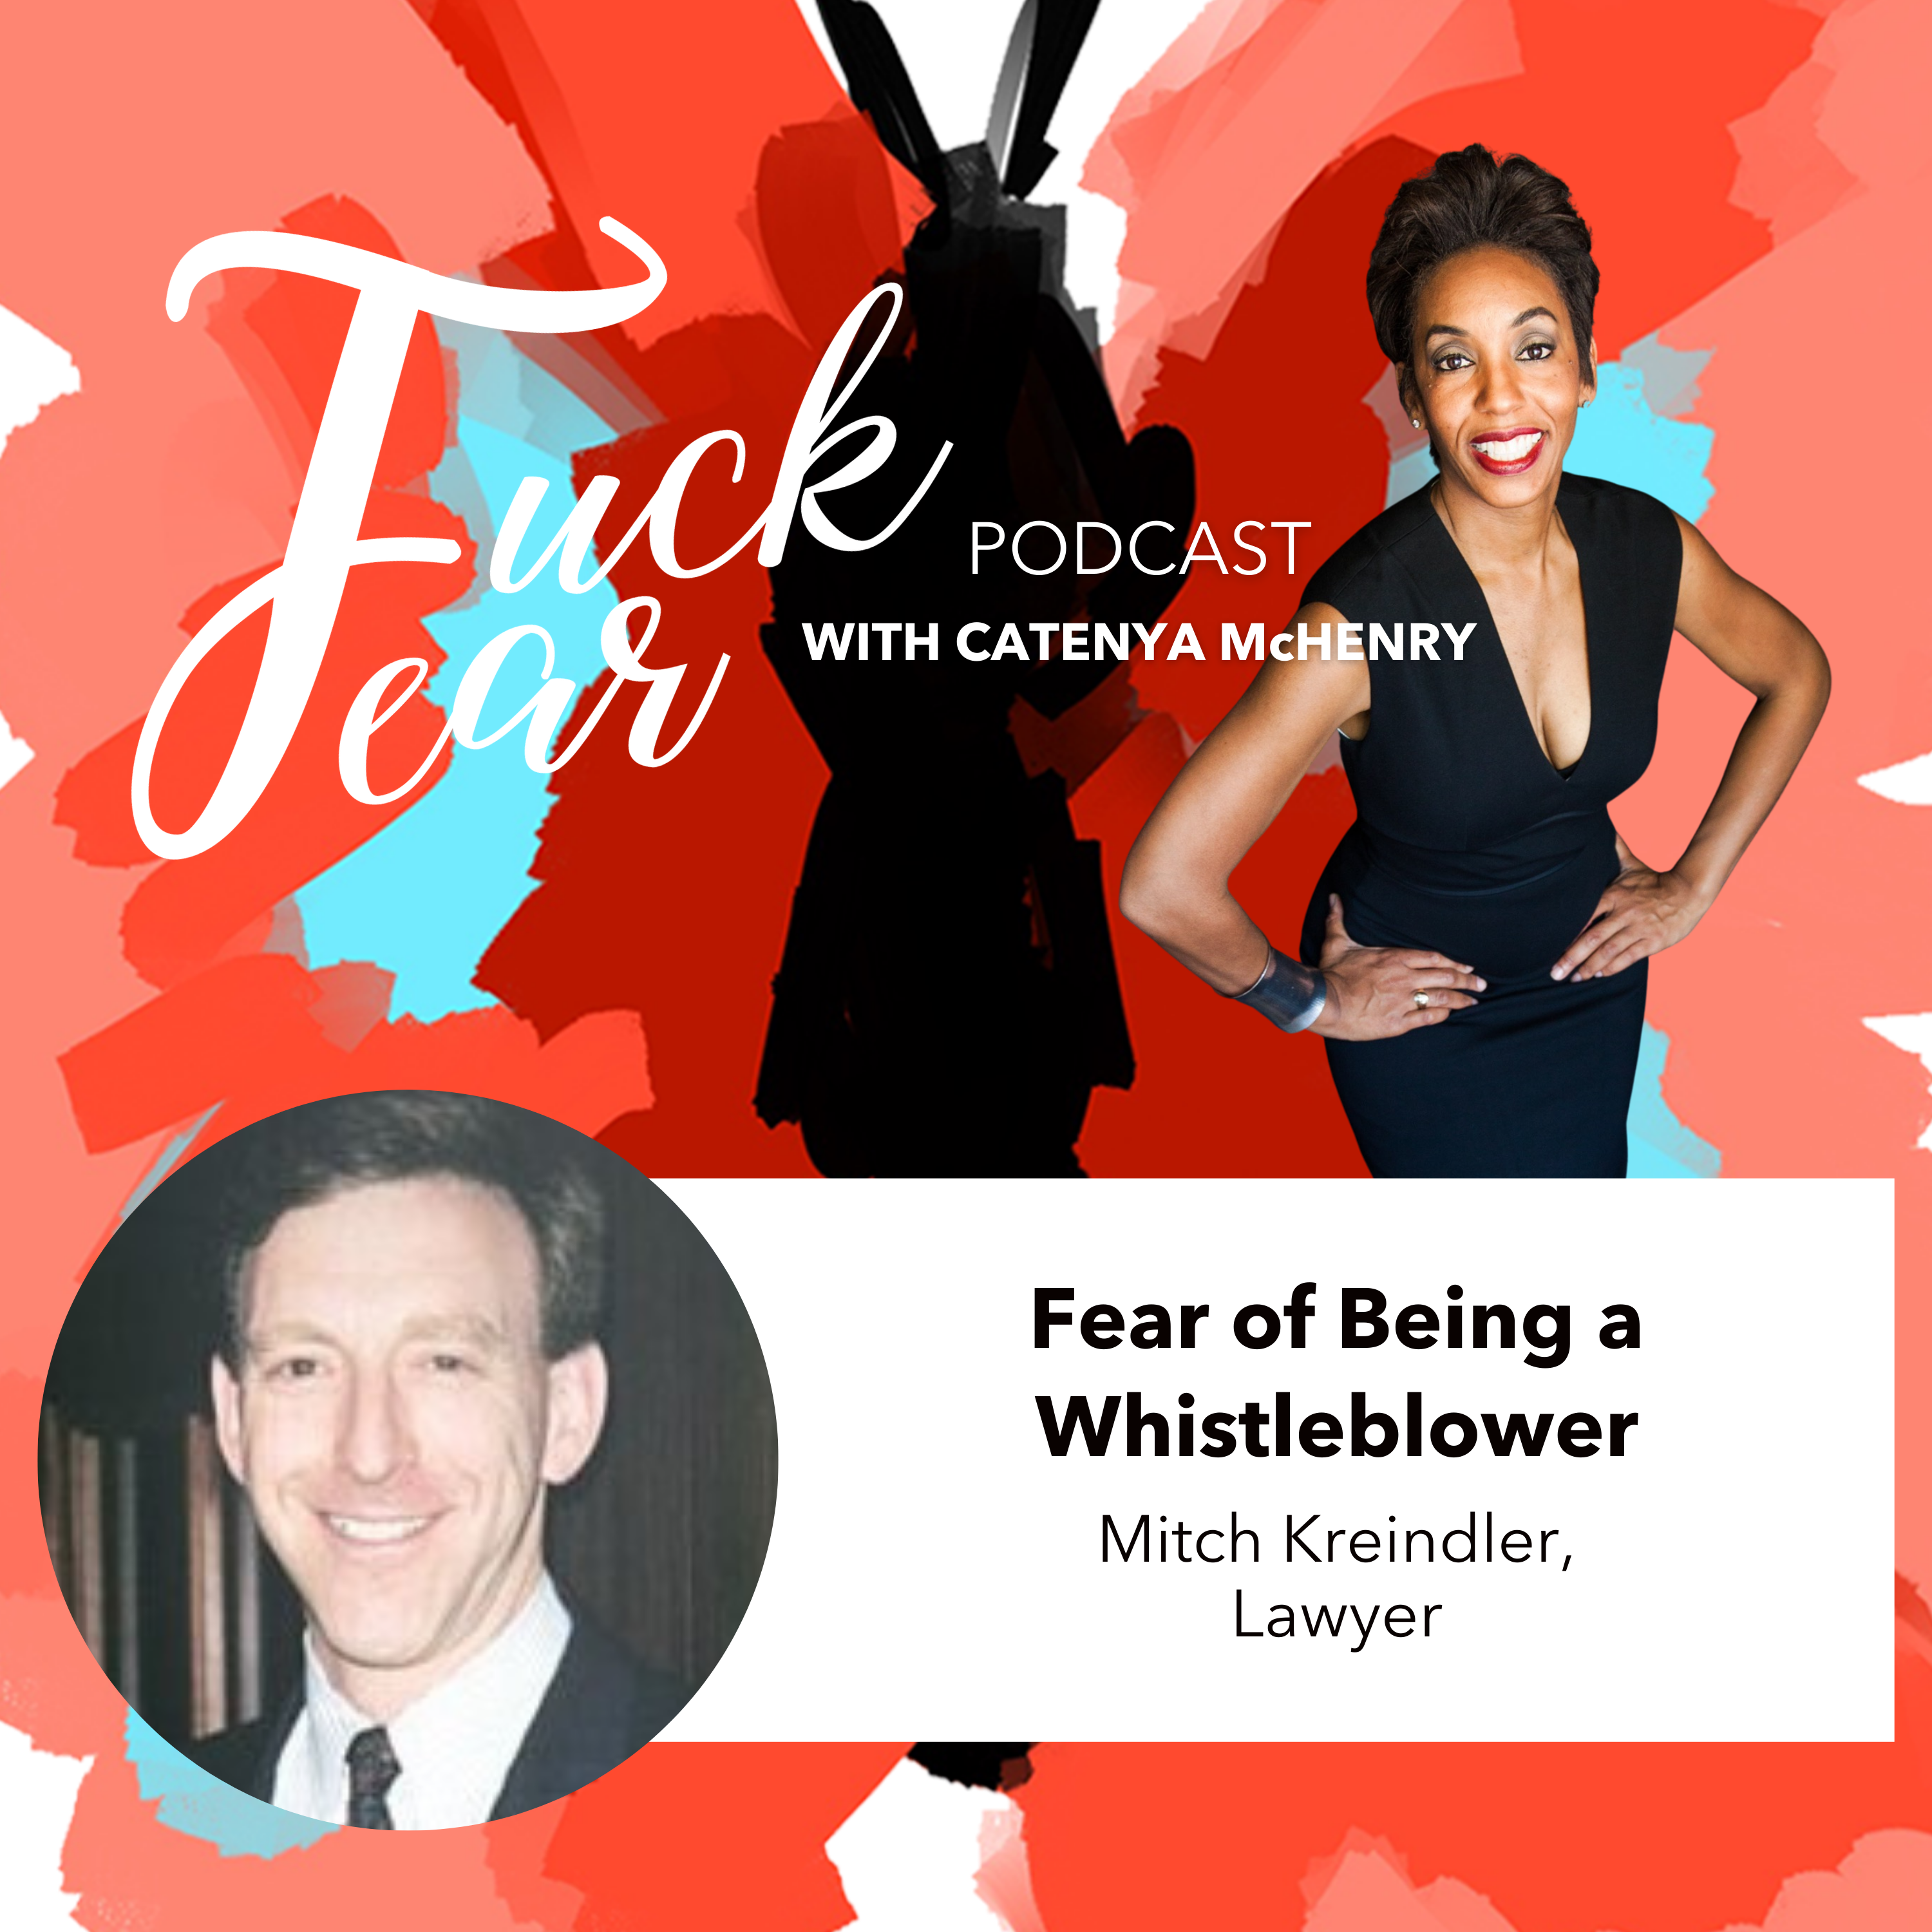 Fear of Being a Whistleblower with lawyer Mitch Kreindler of Kreindler &Associates on the Fuck Fear podcast with host Catenya McHenry